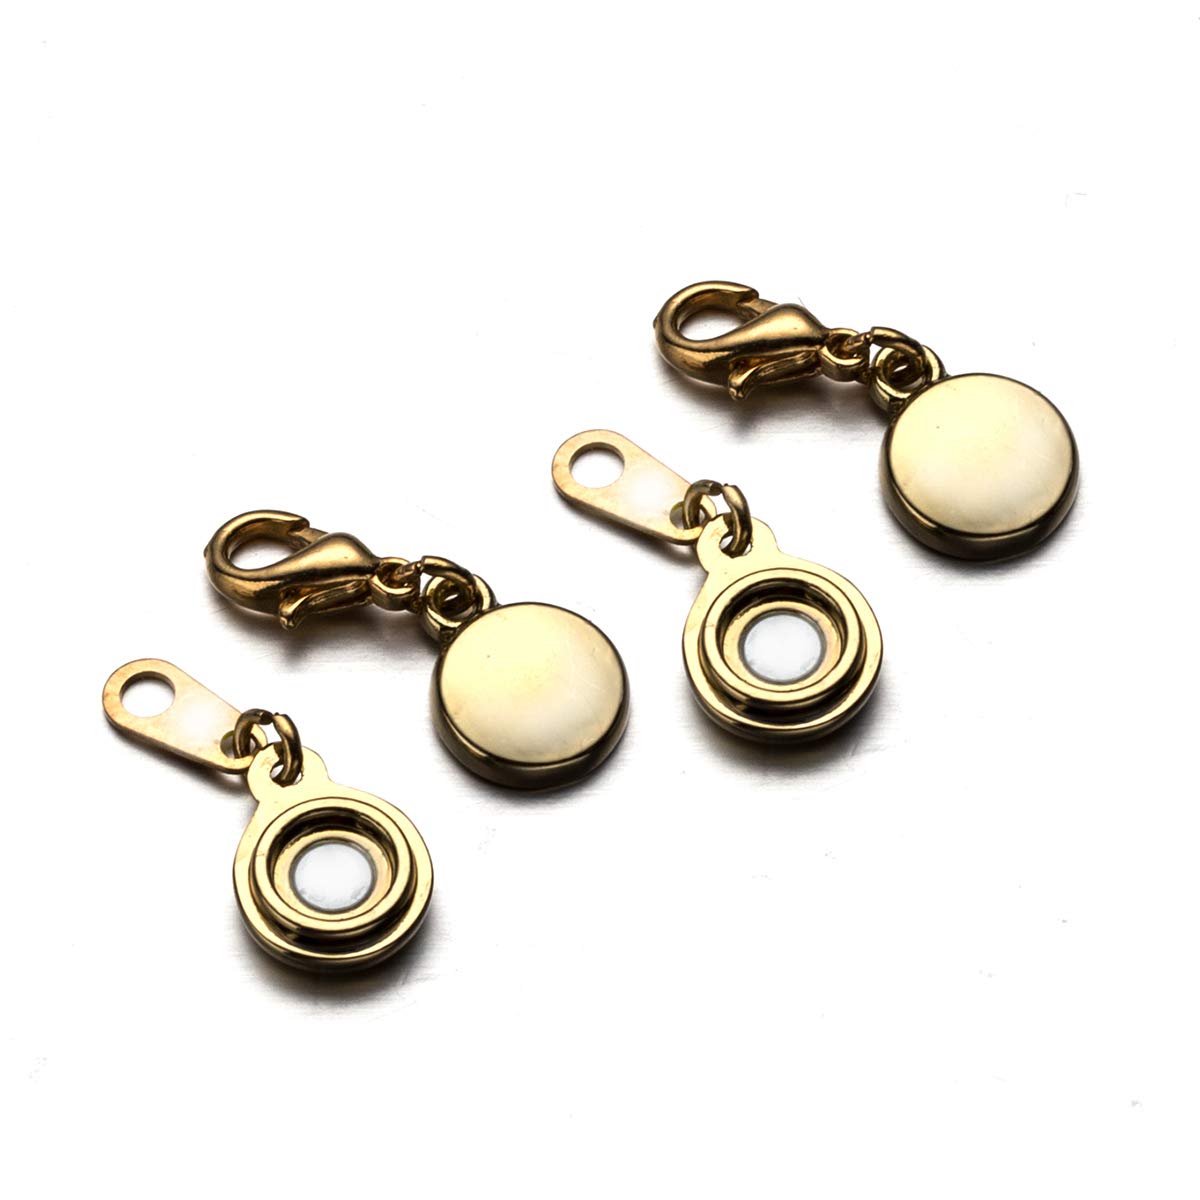 Screw Locking Magnetic Necklace Clasps and Closures Safety Easy Jewelry  Clasps 6mm Light and Small Keep The Clasp in Back 8pcs Silver